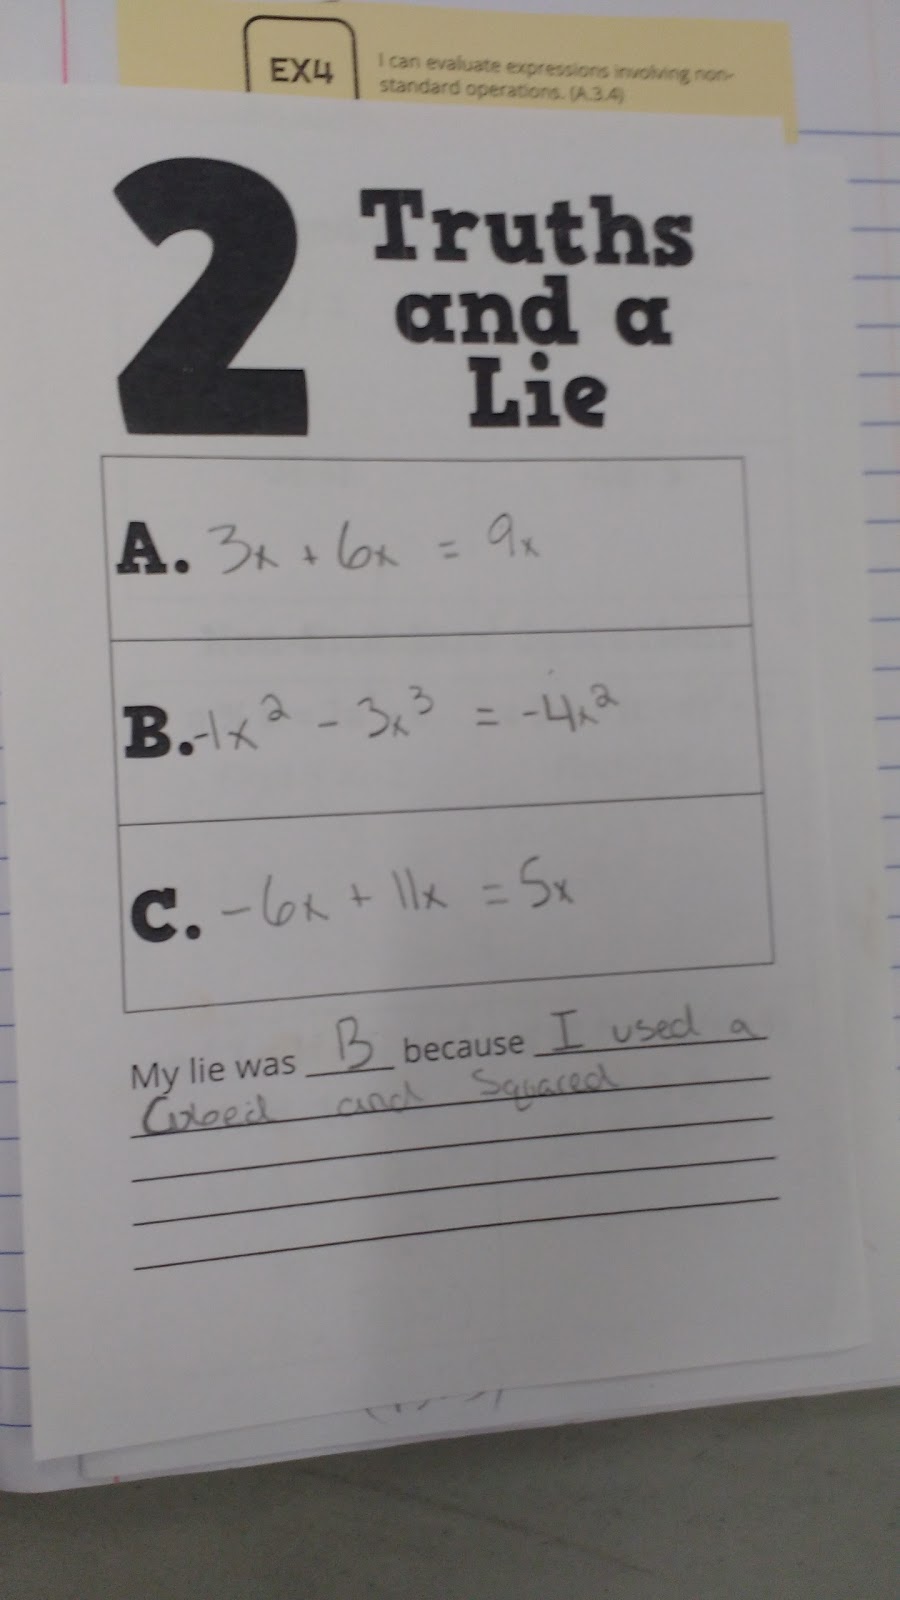 Two truths and a lie combining like terms activity.